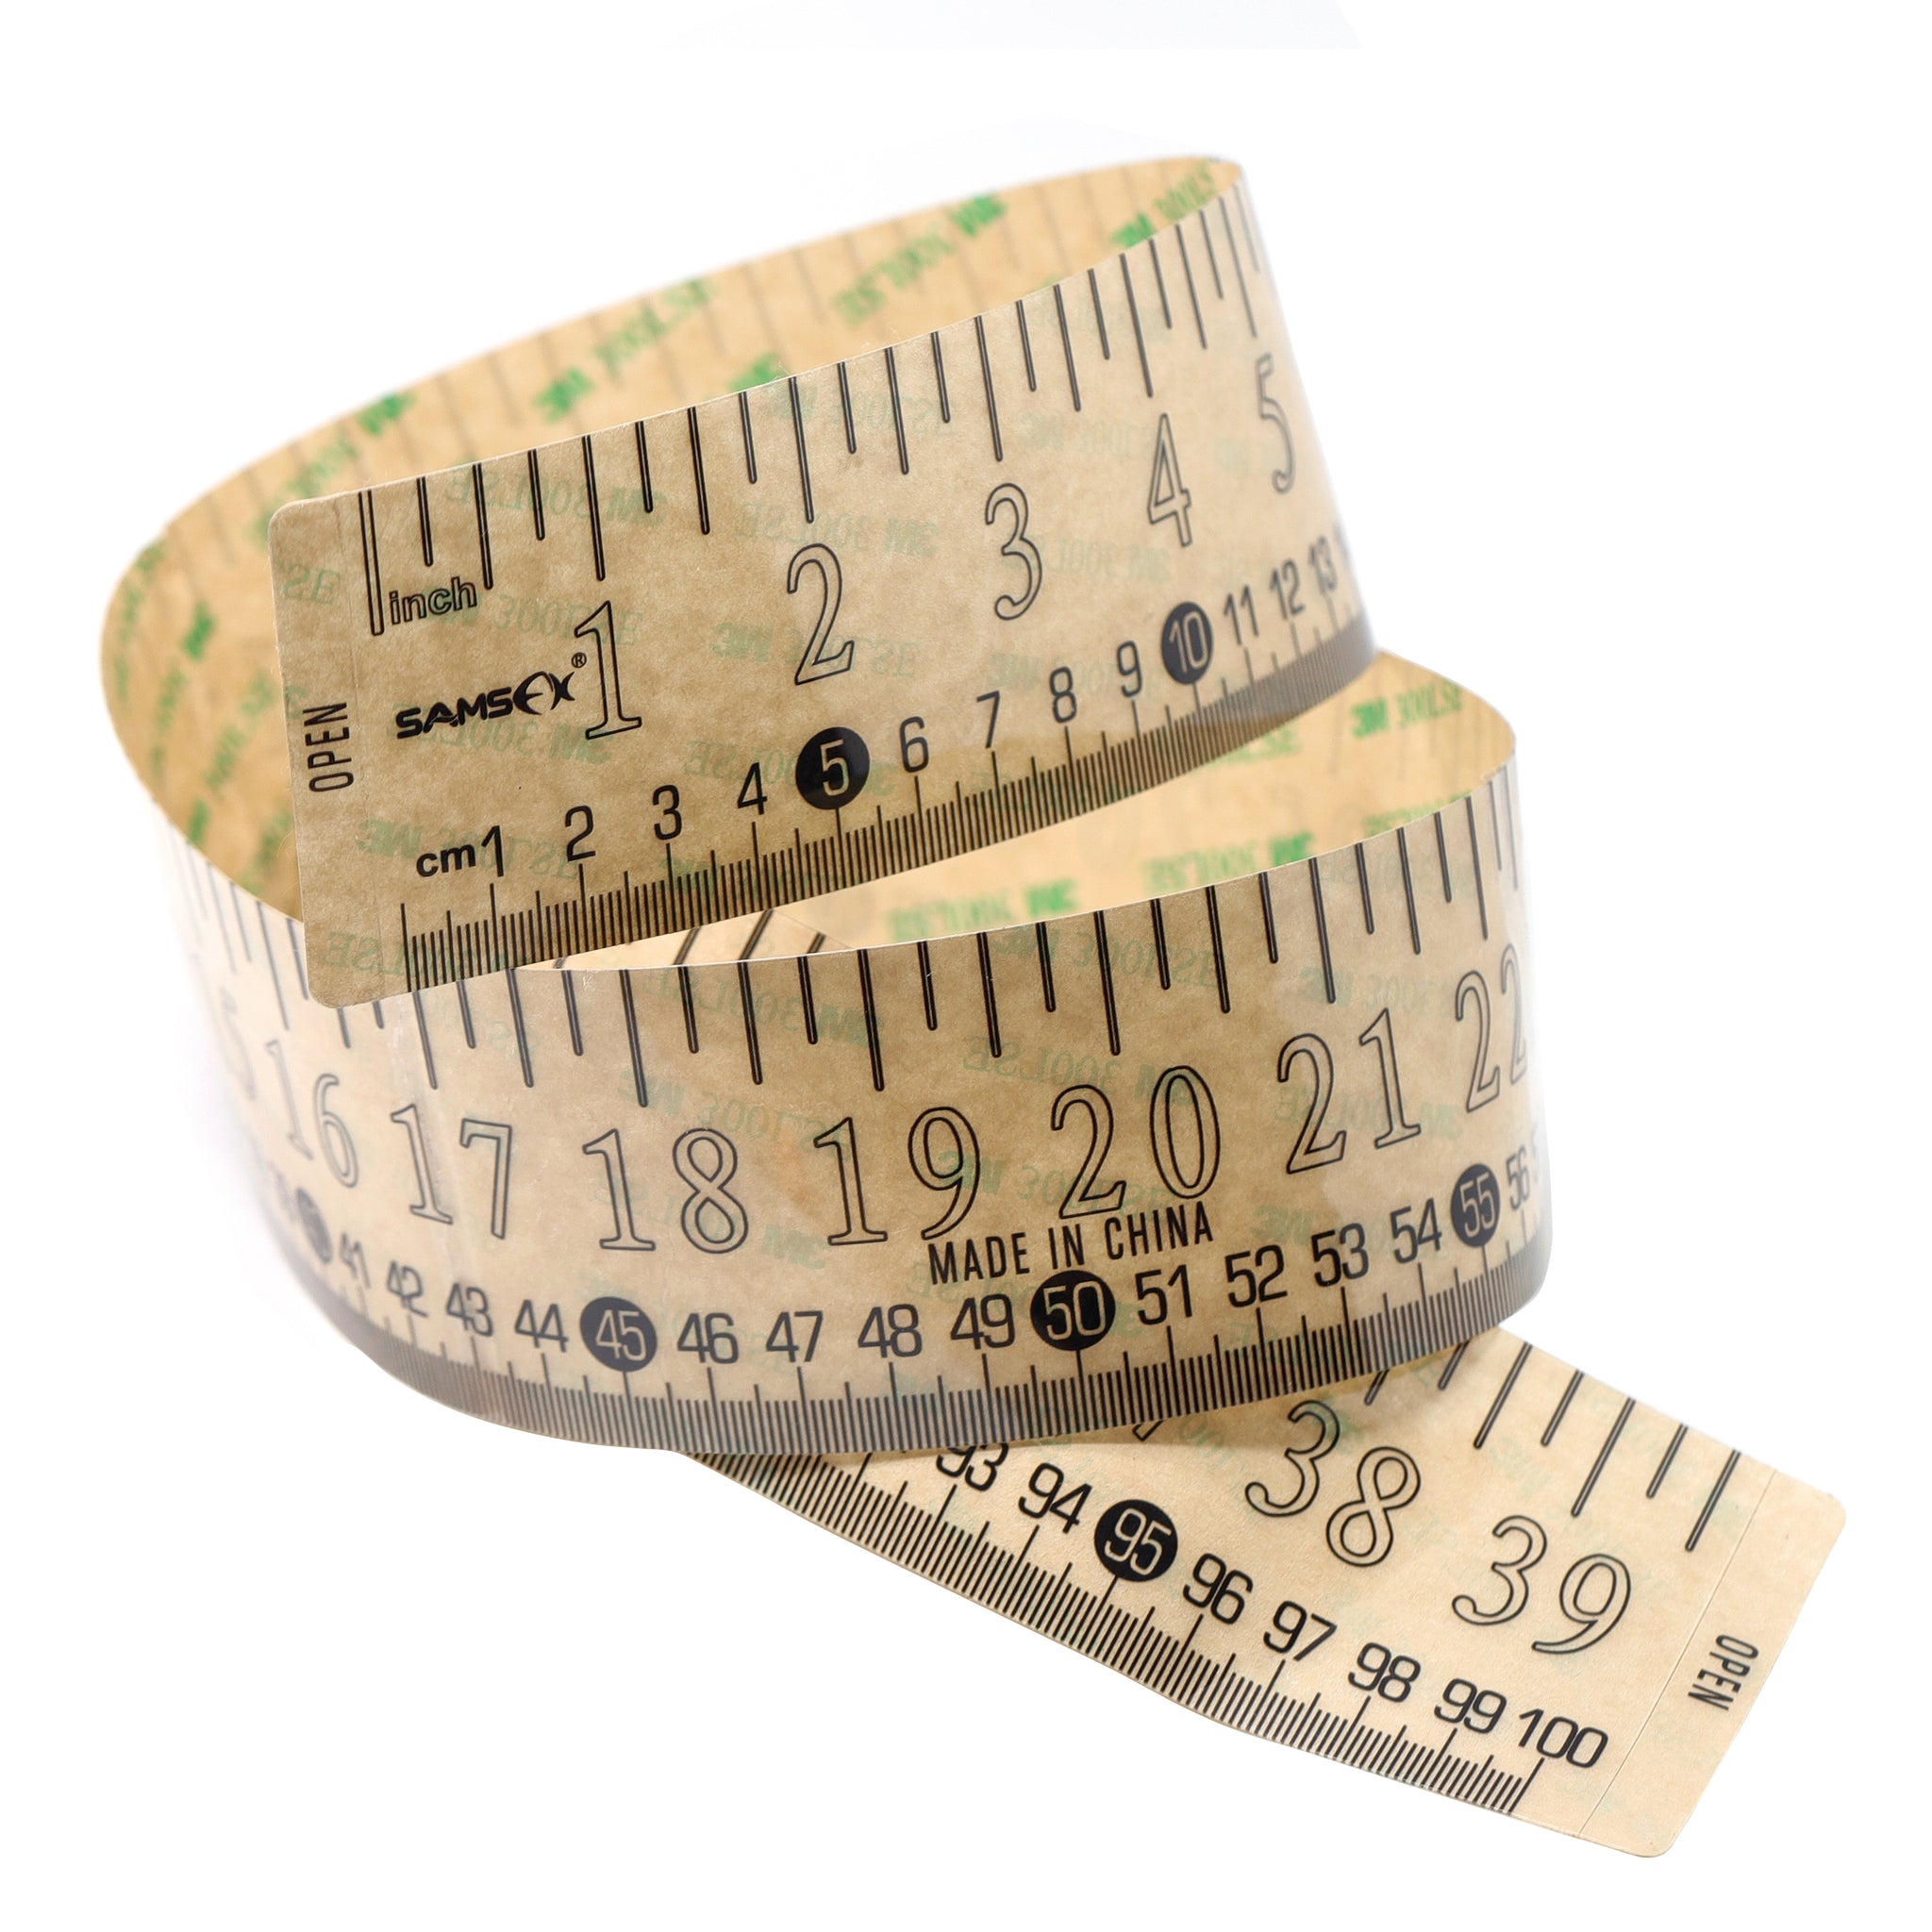 Measure Fly Fishing Net with Ruler